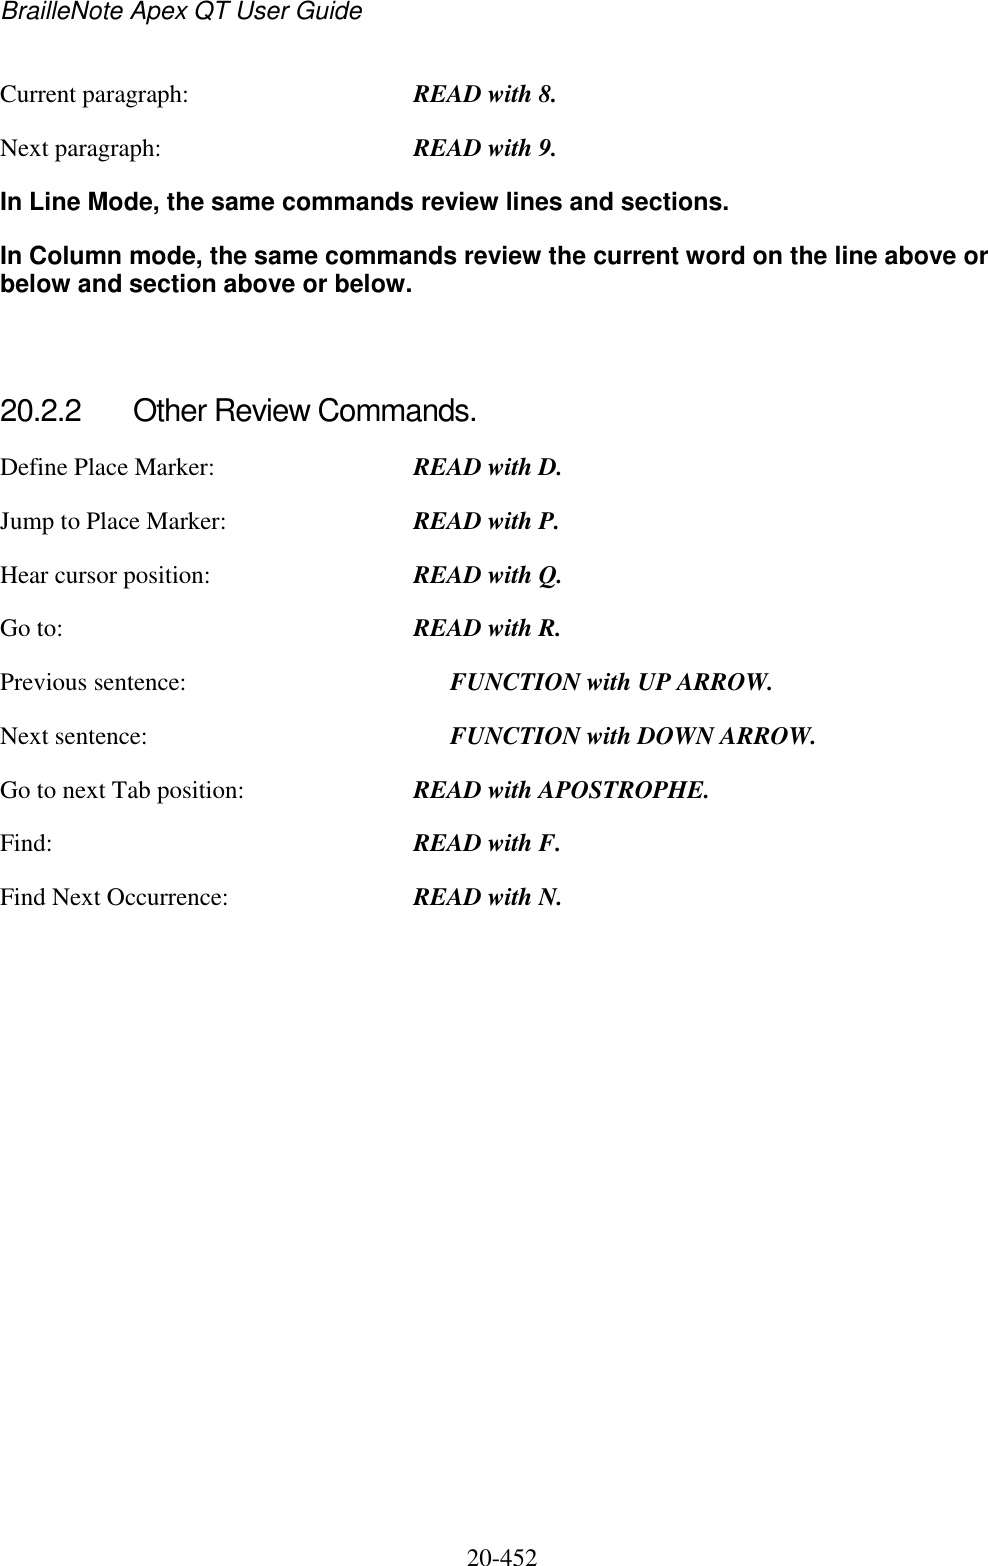 BrailleNote Apex QT User Guide  20-452   Current paragraph:  READ with 8. Next paragraph:  READ with 9. In Line Mode, the same commands review lines and sections. In Column mode, the same commands review the current word on the line above or below and section above or below.   20.2.2  Other Review Commands. Define Place Marker:  READ with D. Jump to Place Marker:  READ with P. Hear cursor position:  READ with Q. Go to:  READ with R. Previous sentence:    FUNCTION with UP ARROW. Next sentence:    FUNCTION with DOWN ARROW. Go to next Tab position:  READ with APOSTROPHE. Find:  READ with F. Find Next Occurrence: READ with N.   